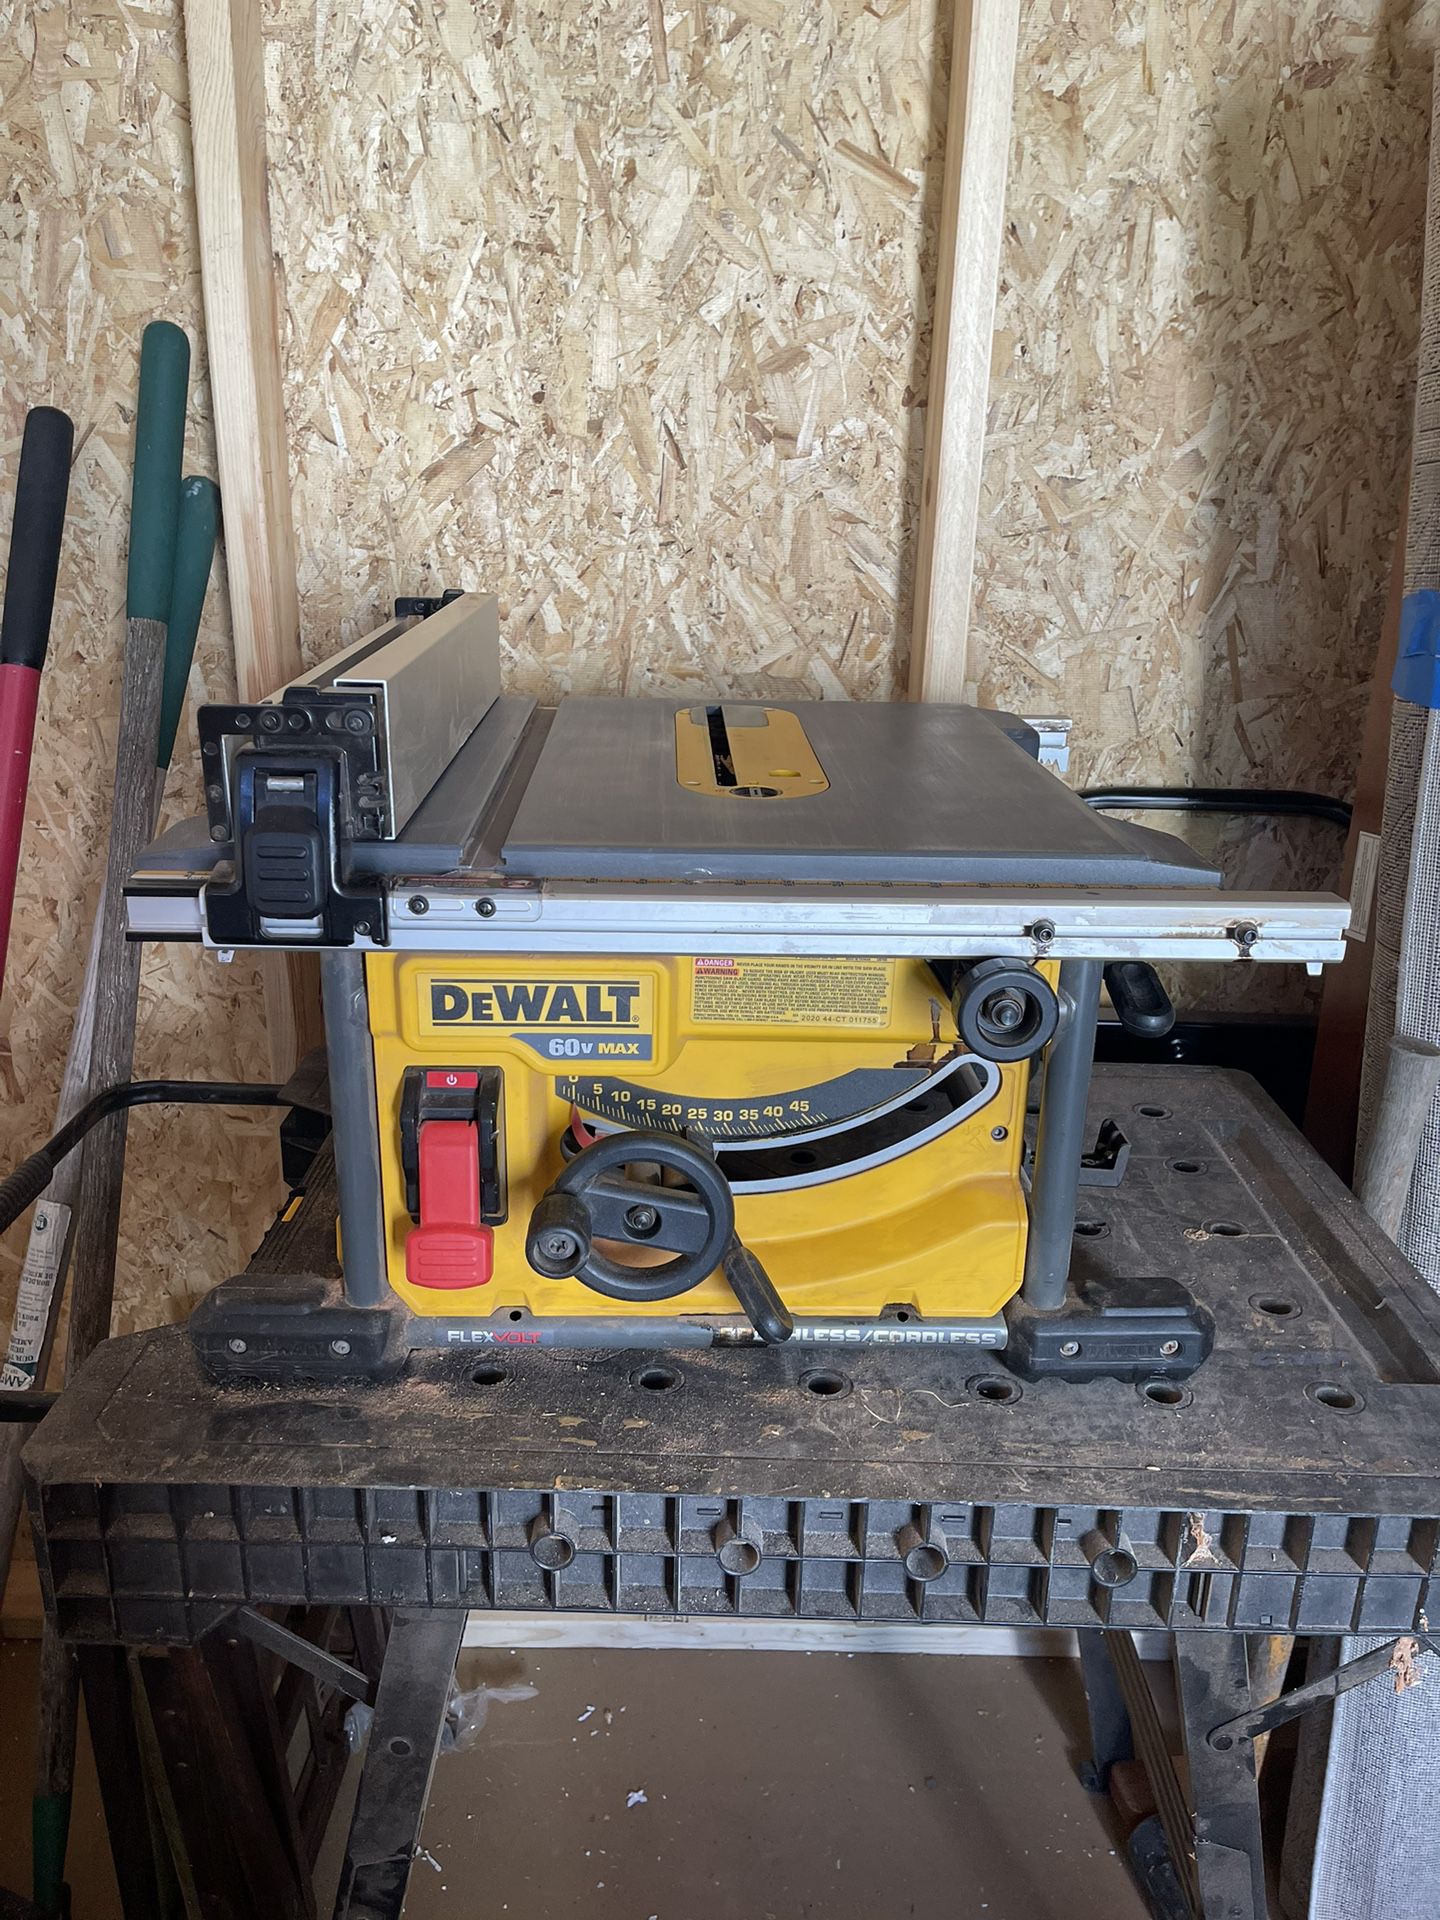 DEWALT FLEXVOLT 60V MAX* Table Saw, 8-1/4-Inch, Tool Only (DCS7485B) for  Sale in Tacoma, WA OfferUp